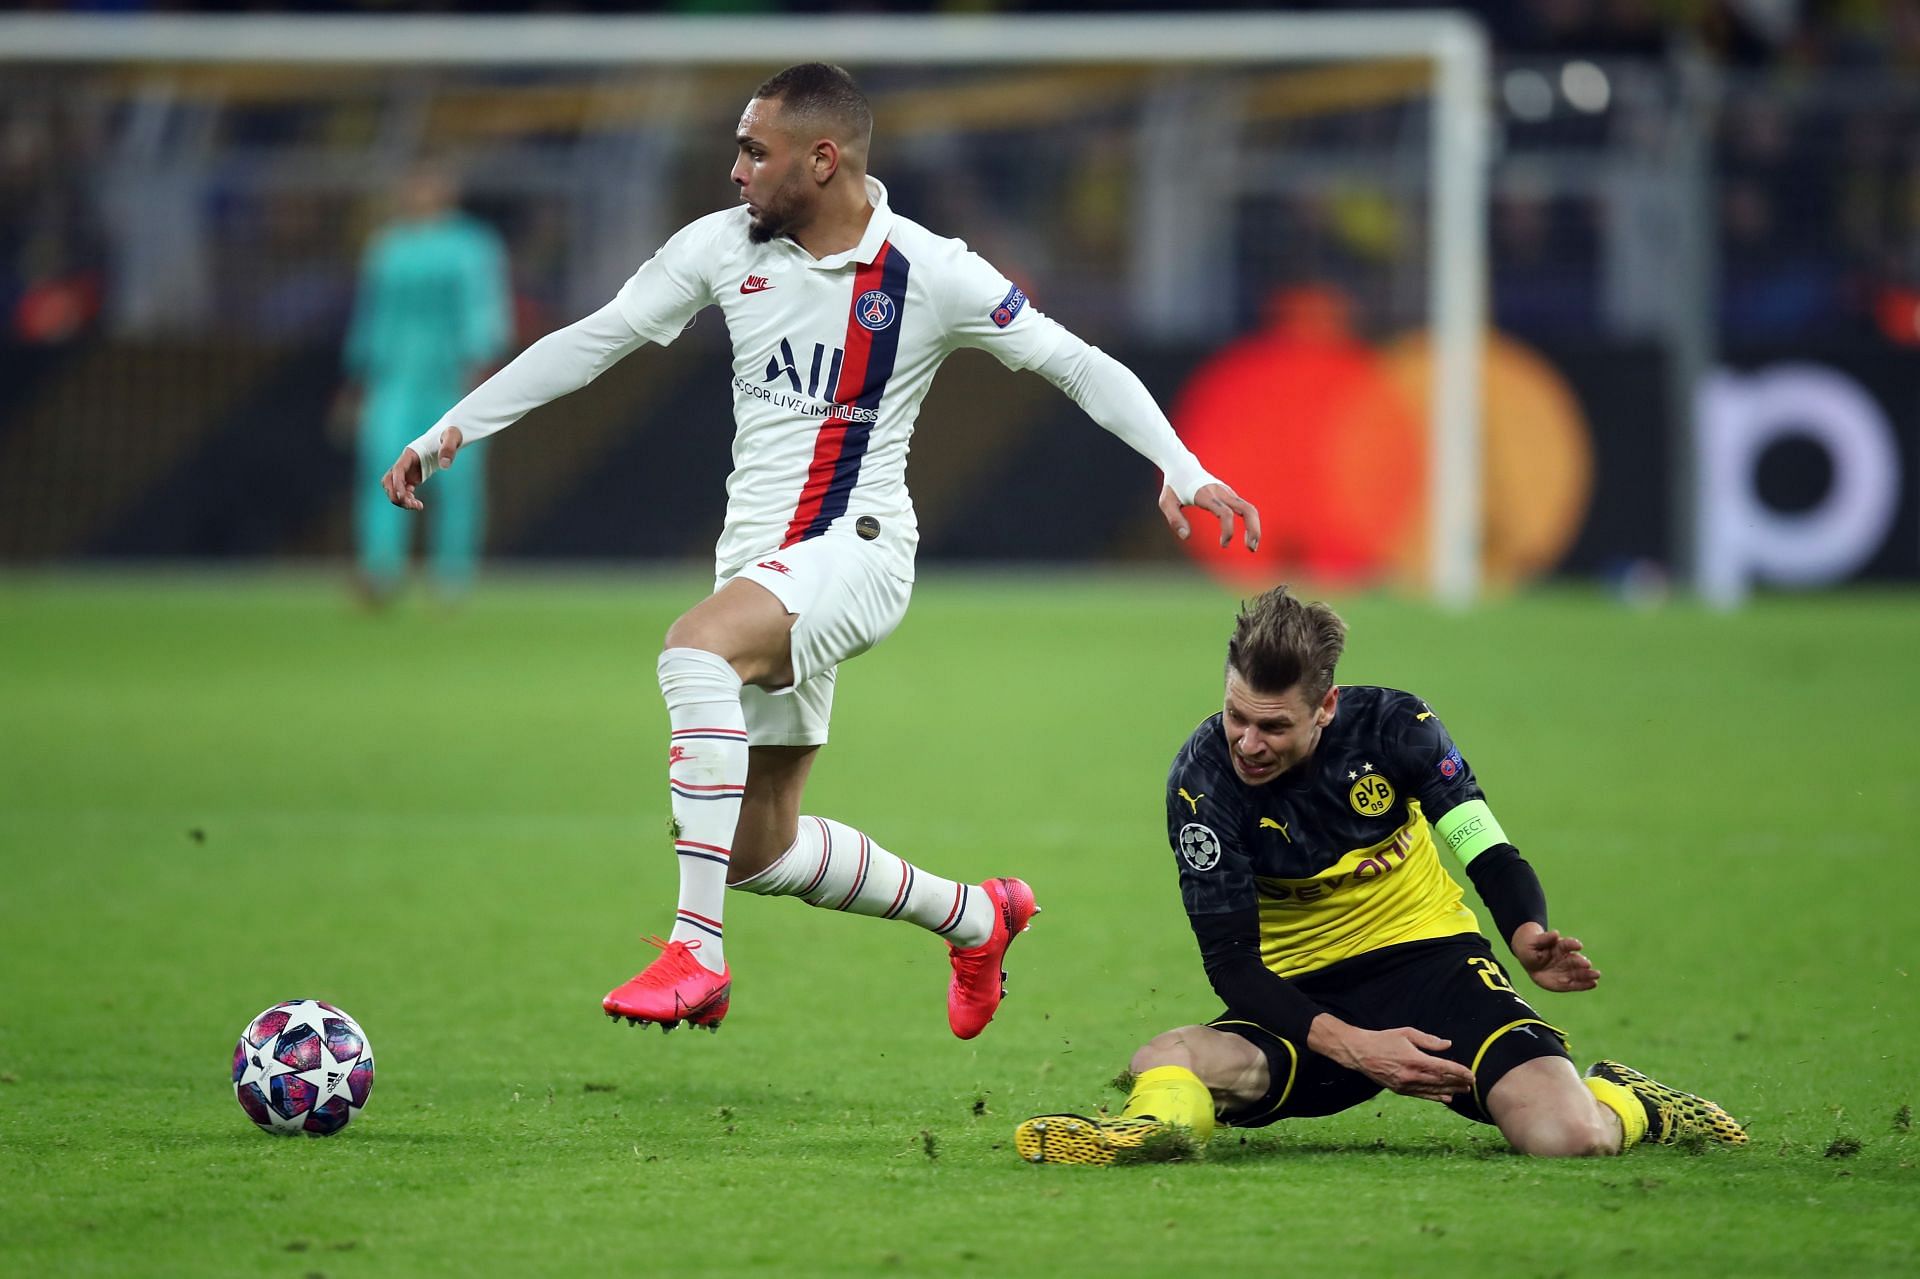 Napoli are planning a move for Layvin Kurzawa